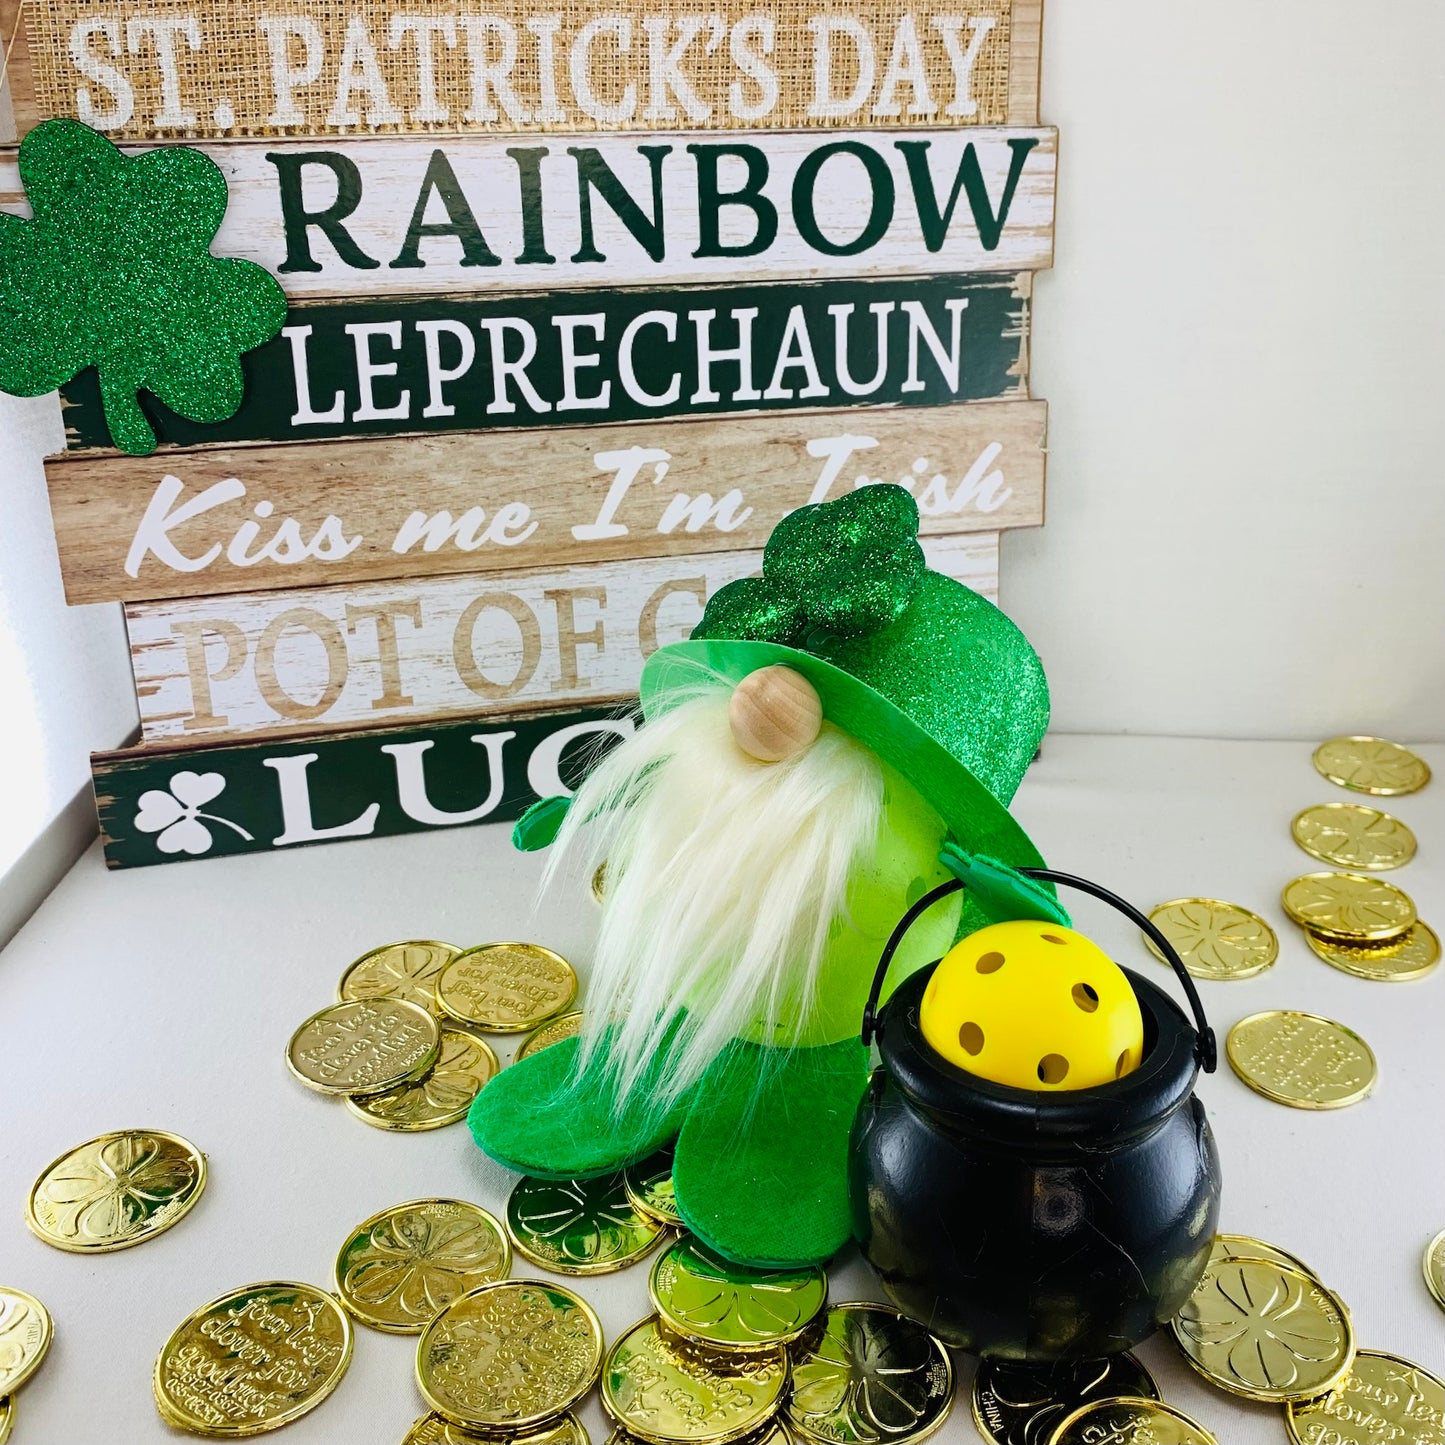 LUCKY THE ST. PATRICK'S DAY PICKLEBALL GNOME FOR THE IRISH HOLIDAY SEASON - DECORATION OR GIFT  These pickleball gnomes are perfect for decoration or gifts for your pickleball addicted friends. Each Pickleball Gnome's body is an upcycled full-sized pickleball and comes with its own pickleball pot of gold!! You will also get 5 gold coins with each gnome!! These Gnomes are the perfect gifts for all you pickleball lovers in your life!! Adding a Pickleball Gnome to your house only makes it better.